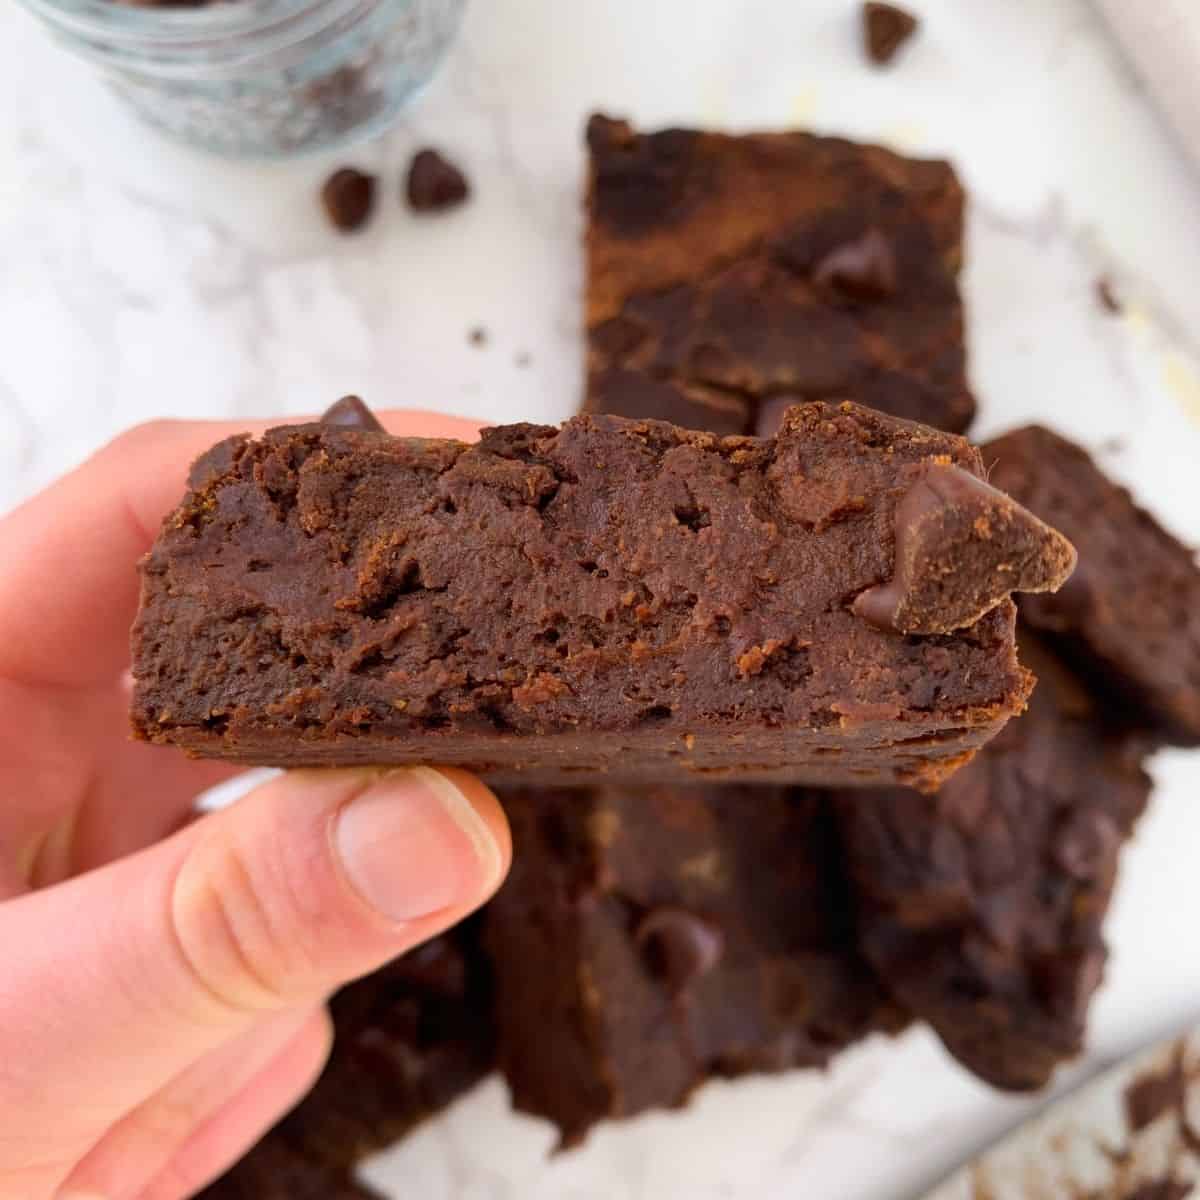 holding a brownie sideways to show the inside, fudgy and moist